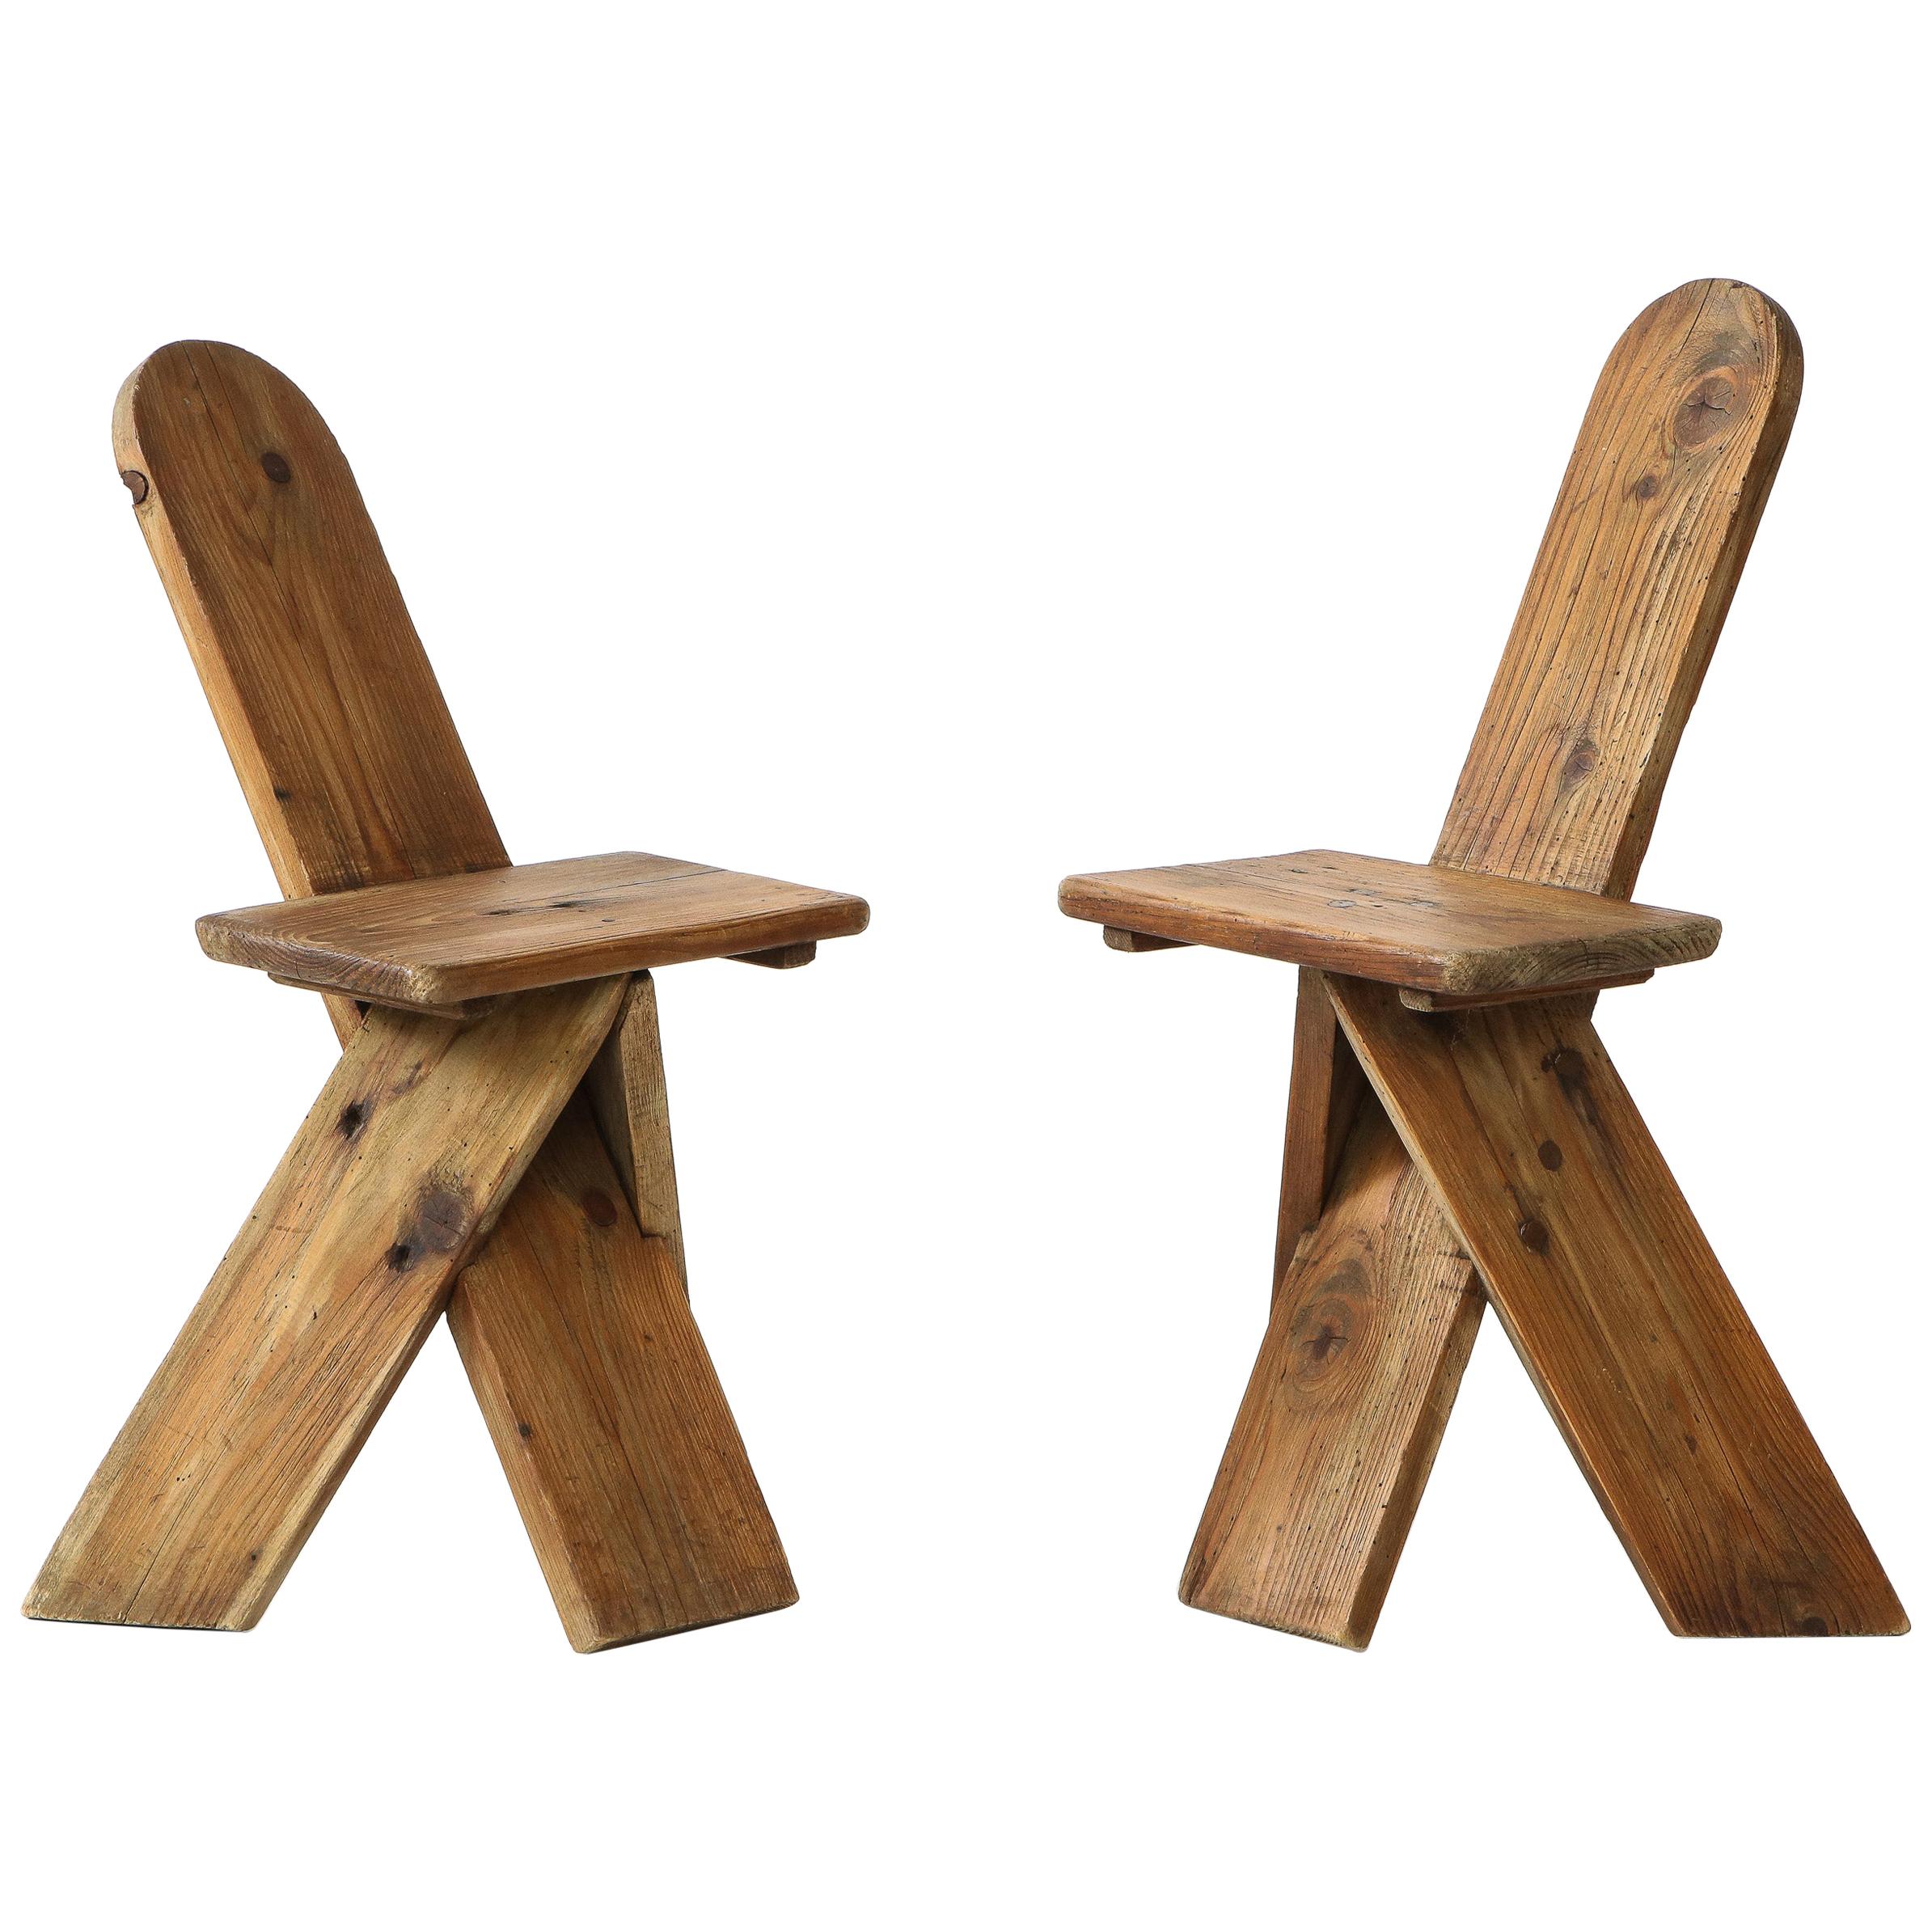 Sculptural Vintage Organic Modern Pine Side Chairs, France, 1960s